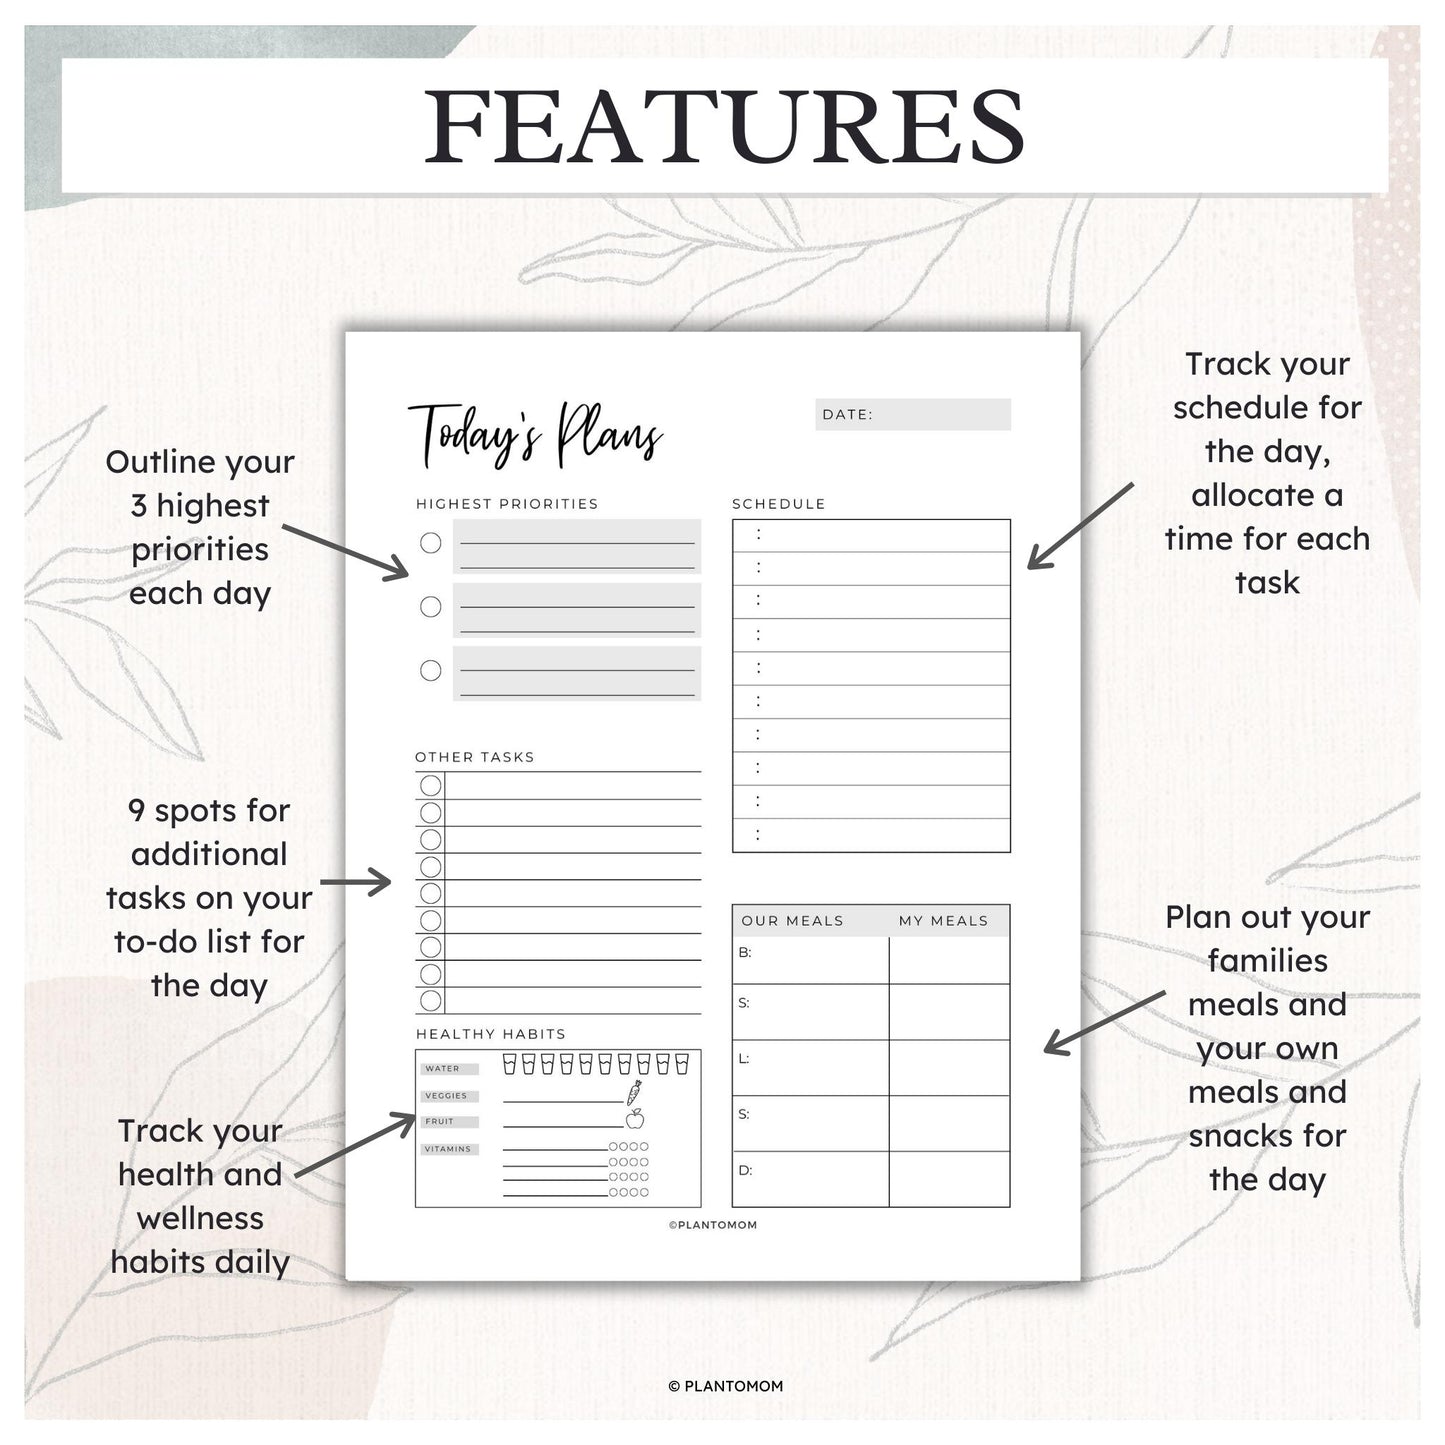 Today's Plans Layout #1A - Printable Daily Planner PDF